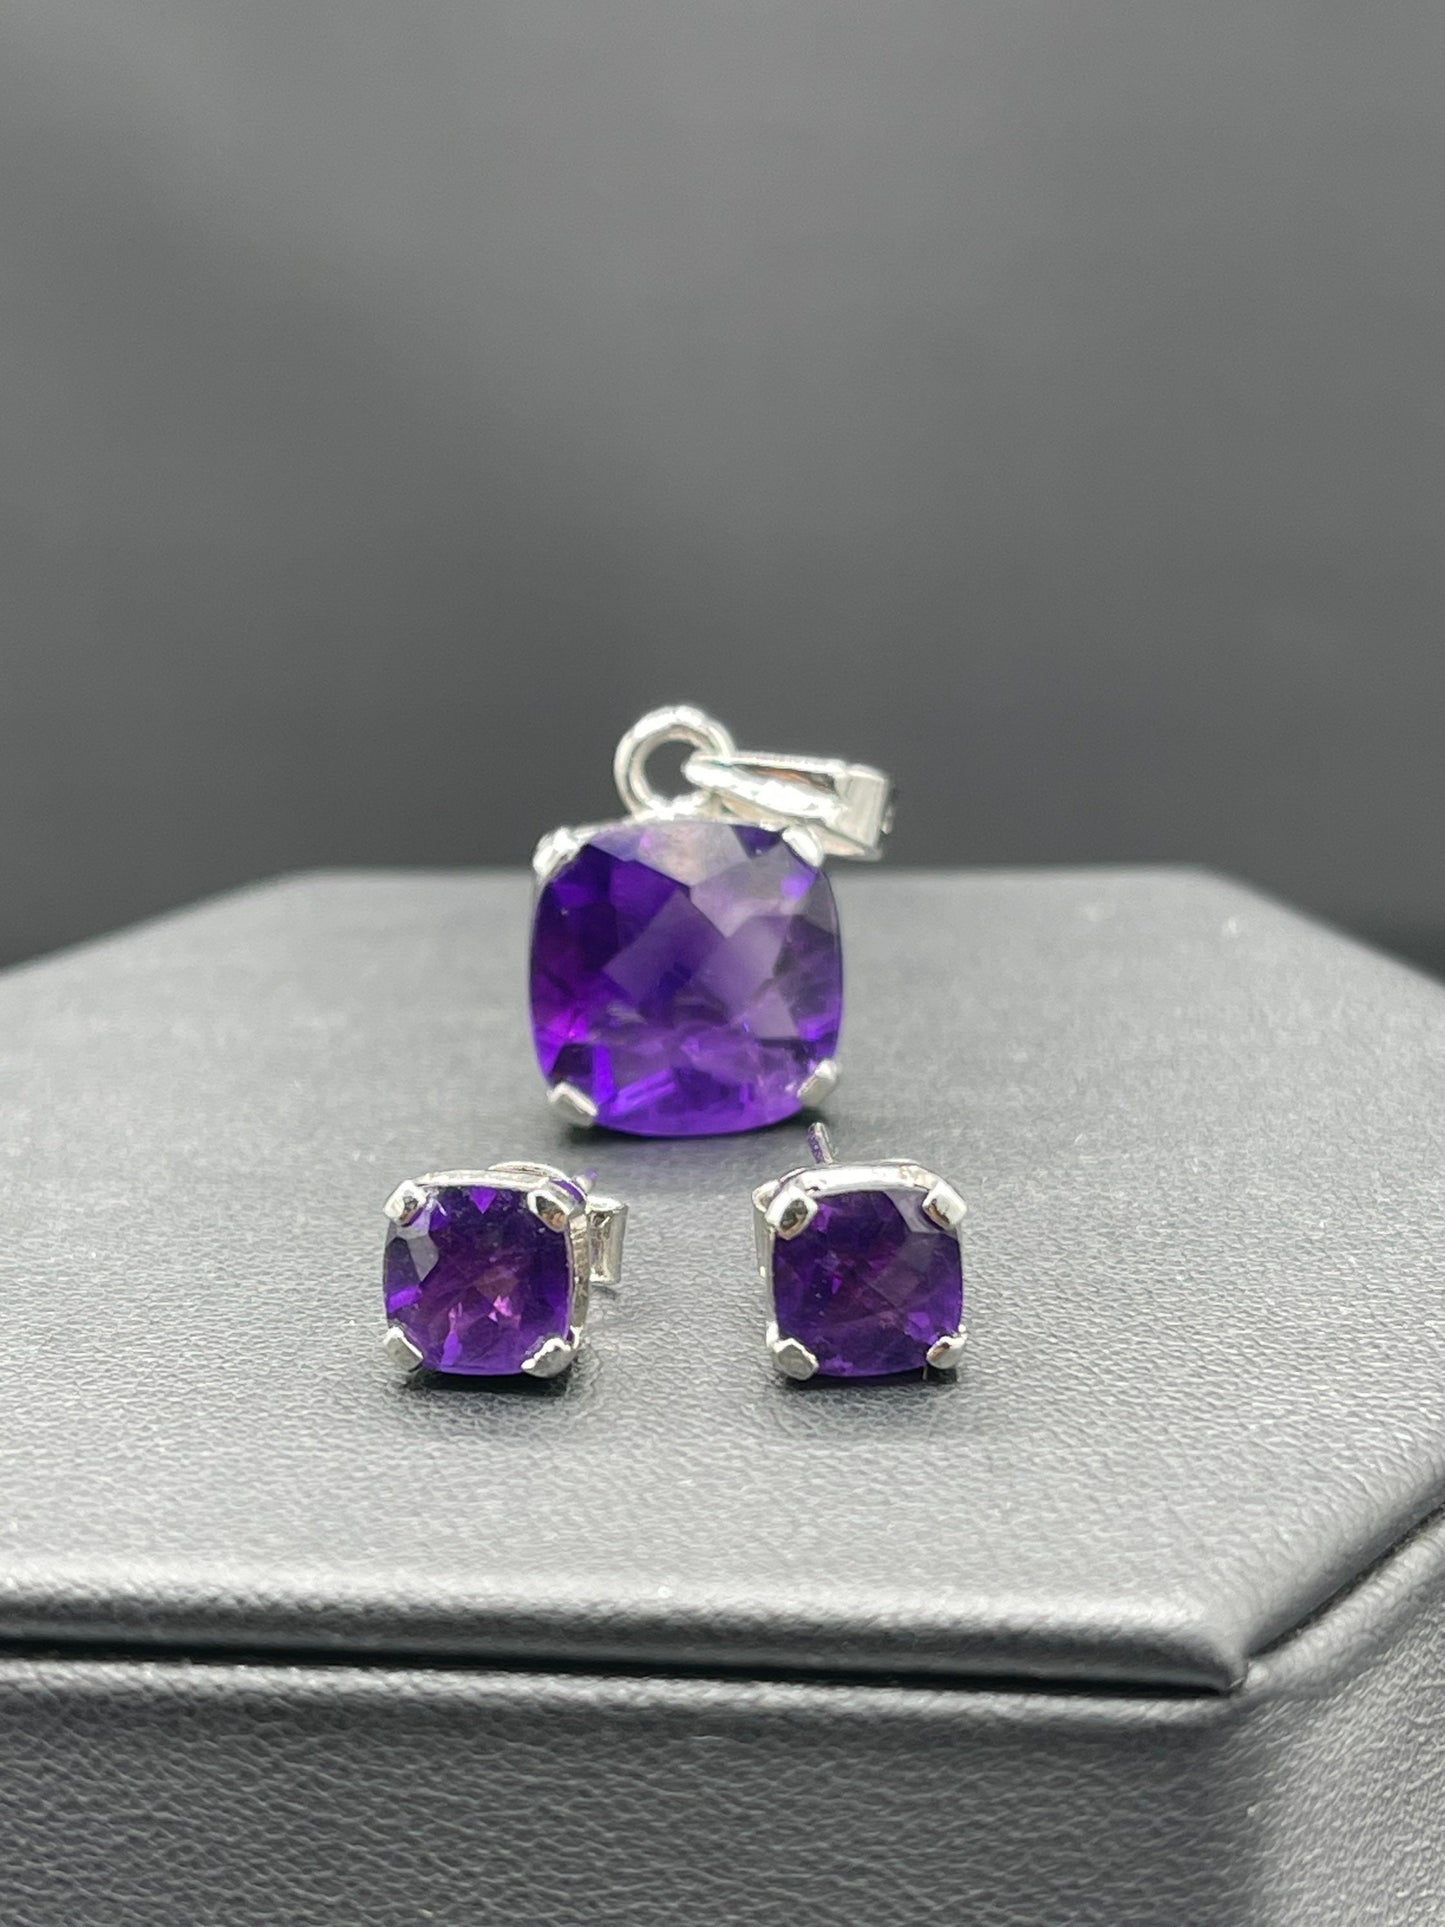 Natural Zambian Amethyst Sterling Silver Earrings and Pendant Set